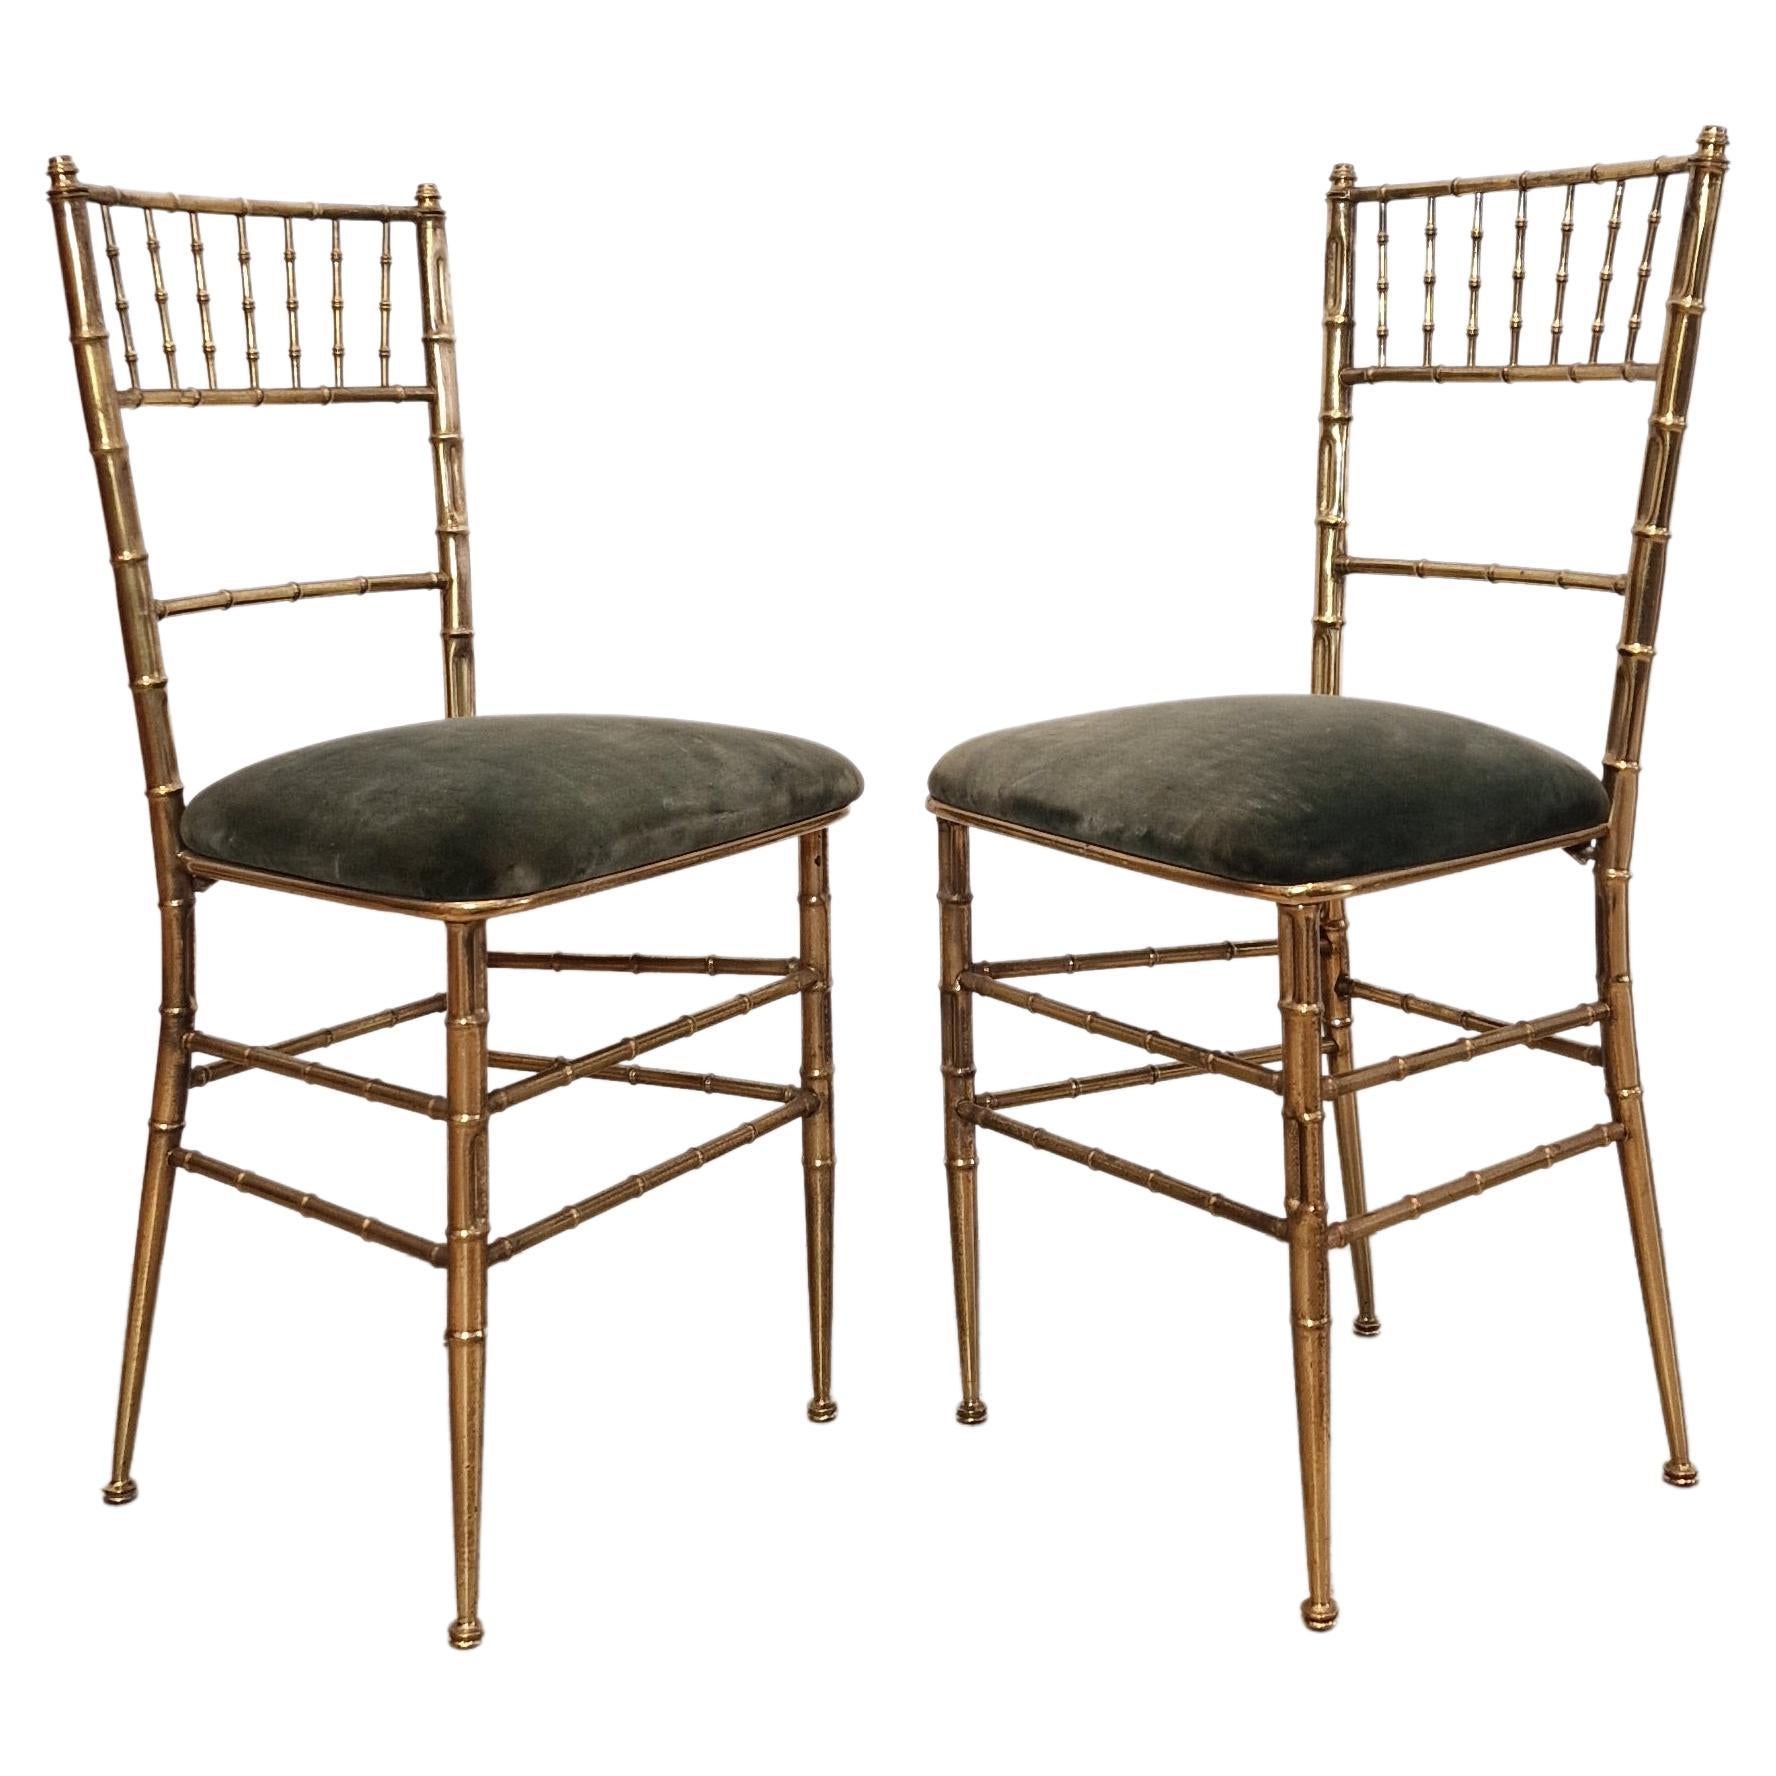 Pair of Faux Bamboo Opera Chairs, 1940s, French